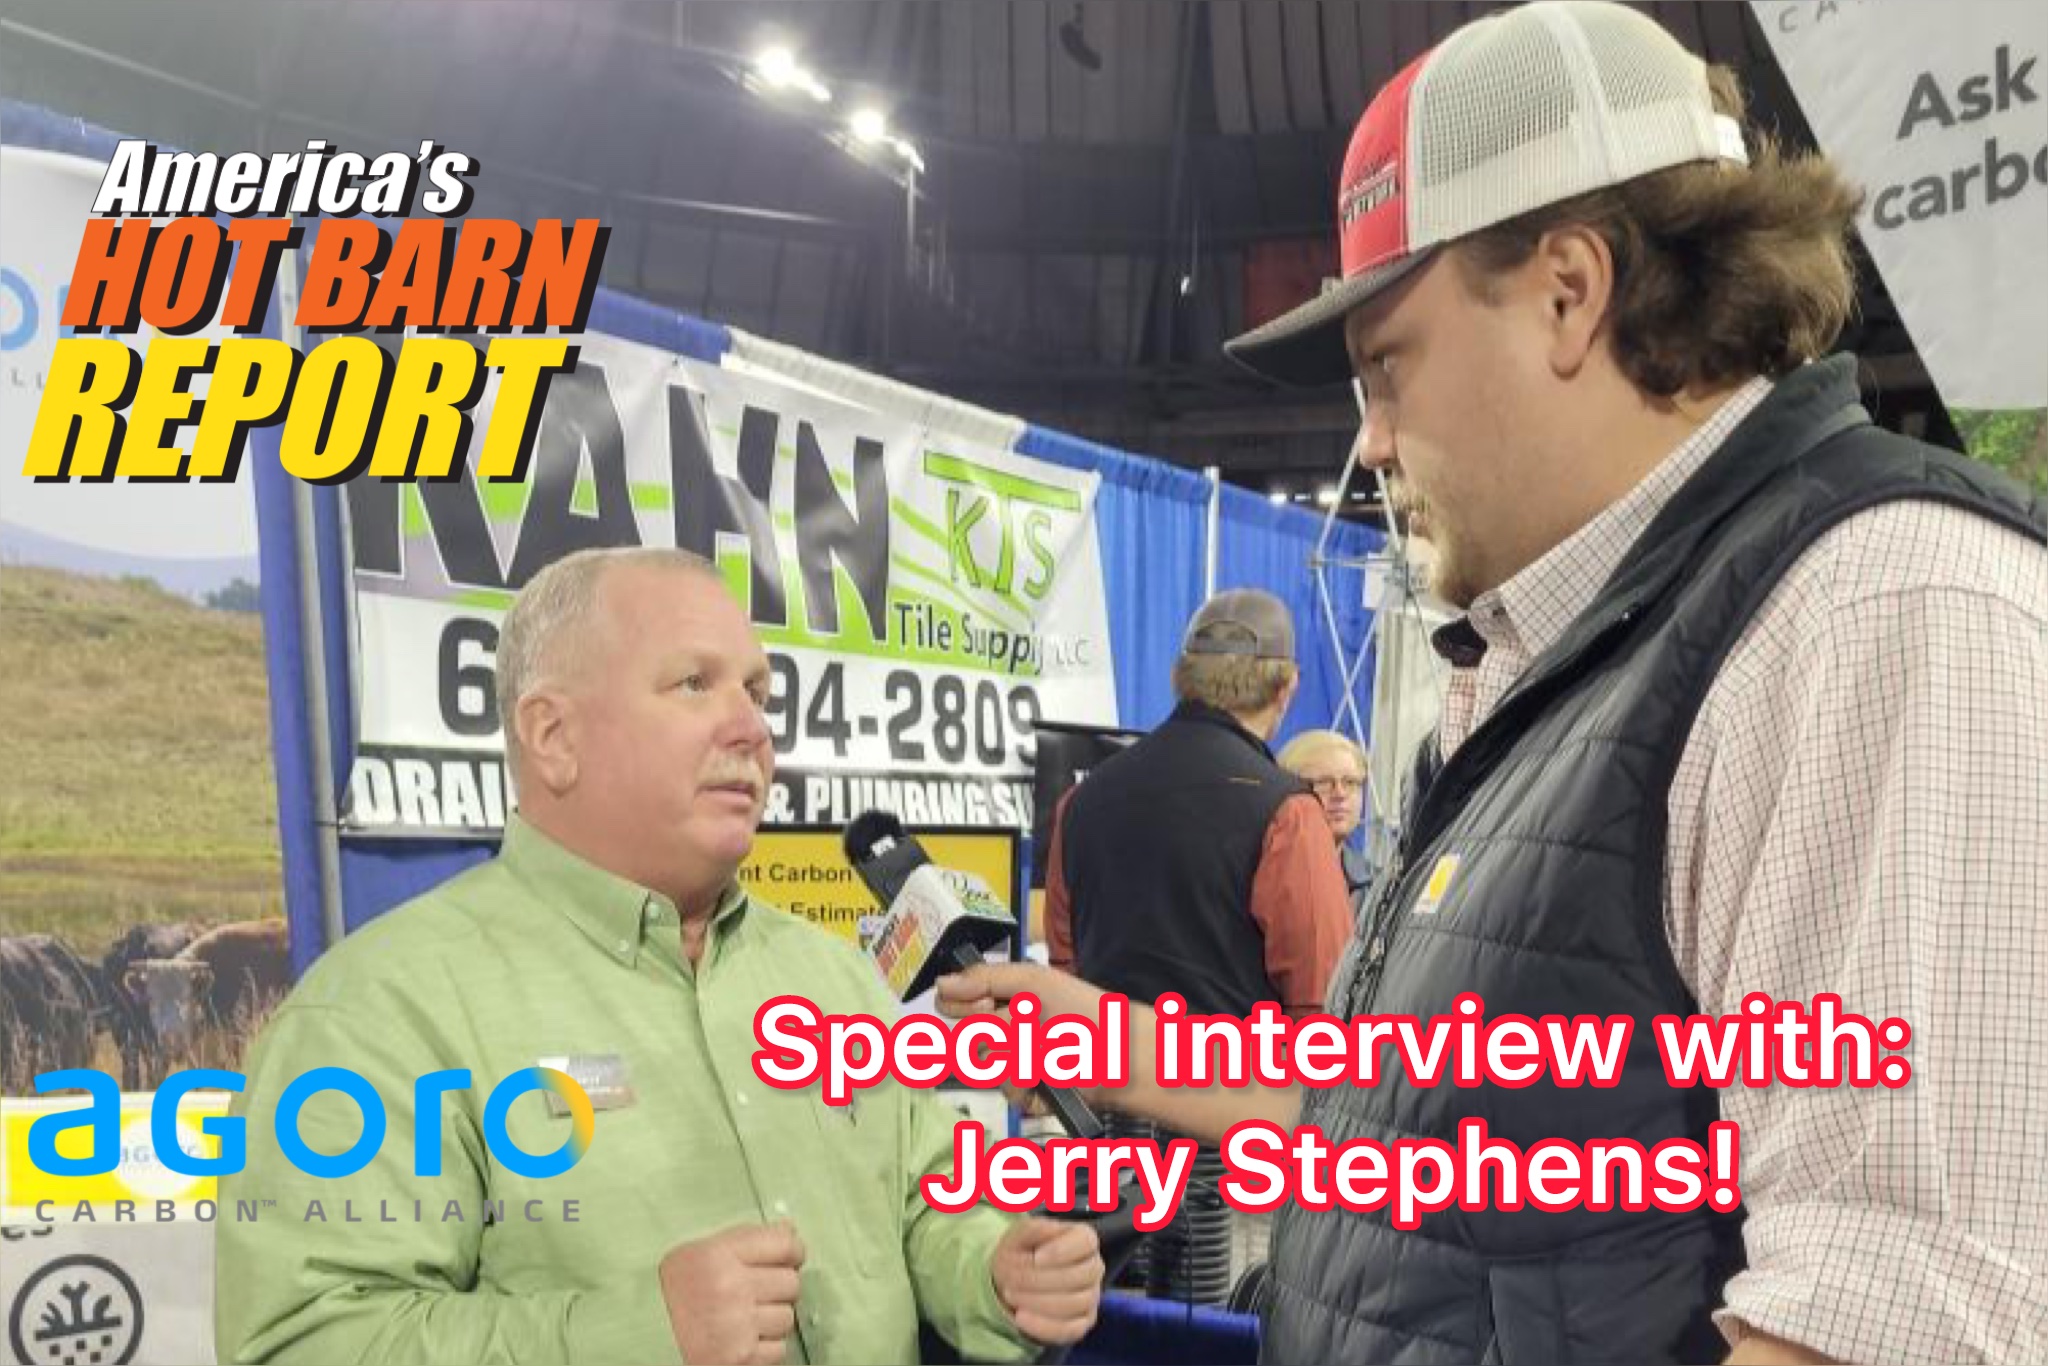 HOT BARN REPORT: Special interview with Agoro’s Jerry Stephens! Let’s talk carbon on todays Wednesday edition of America’s HBR! cover art